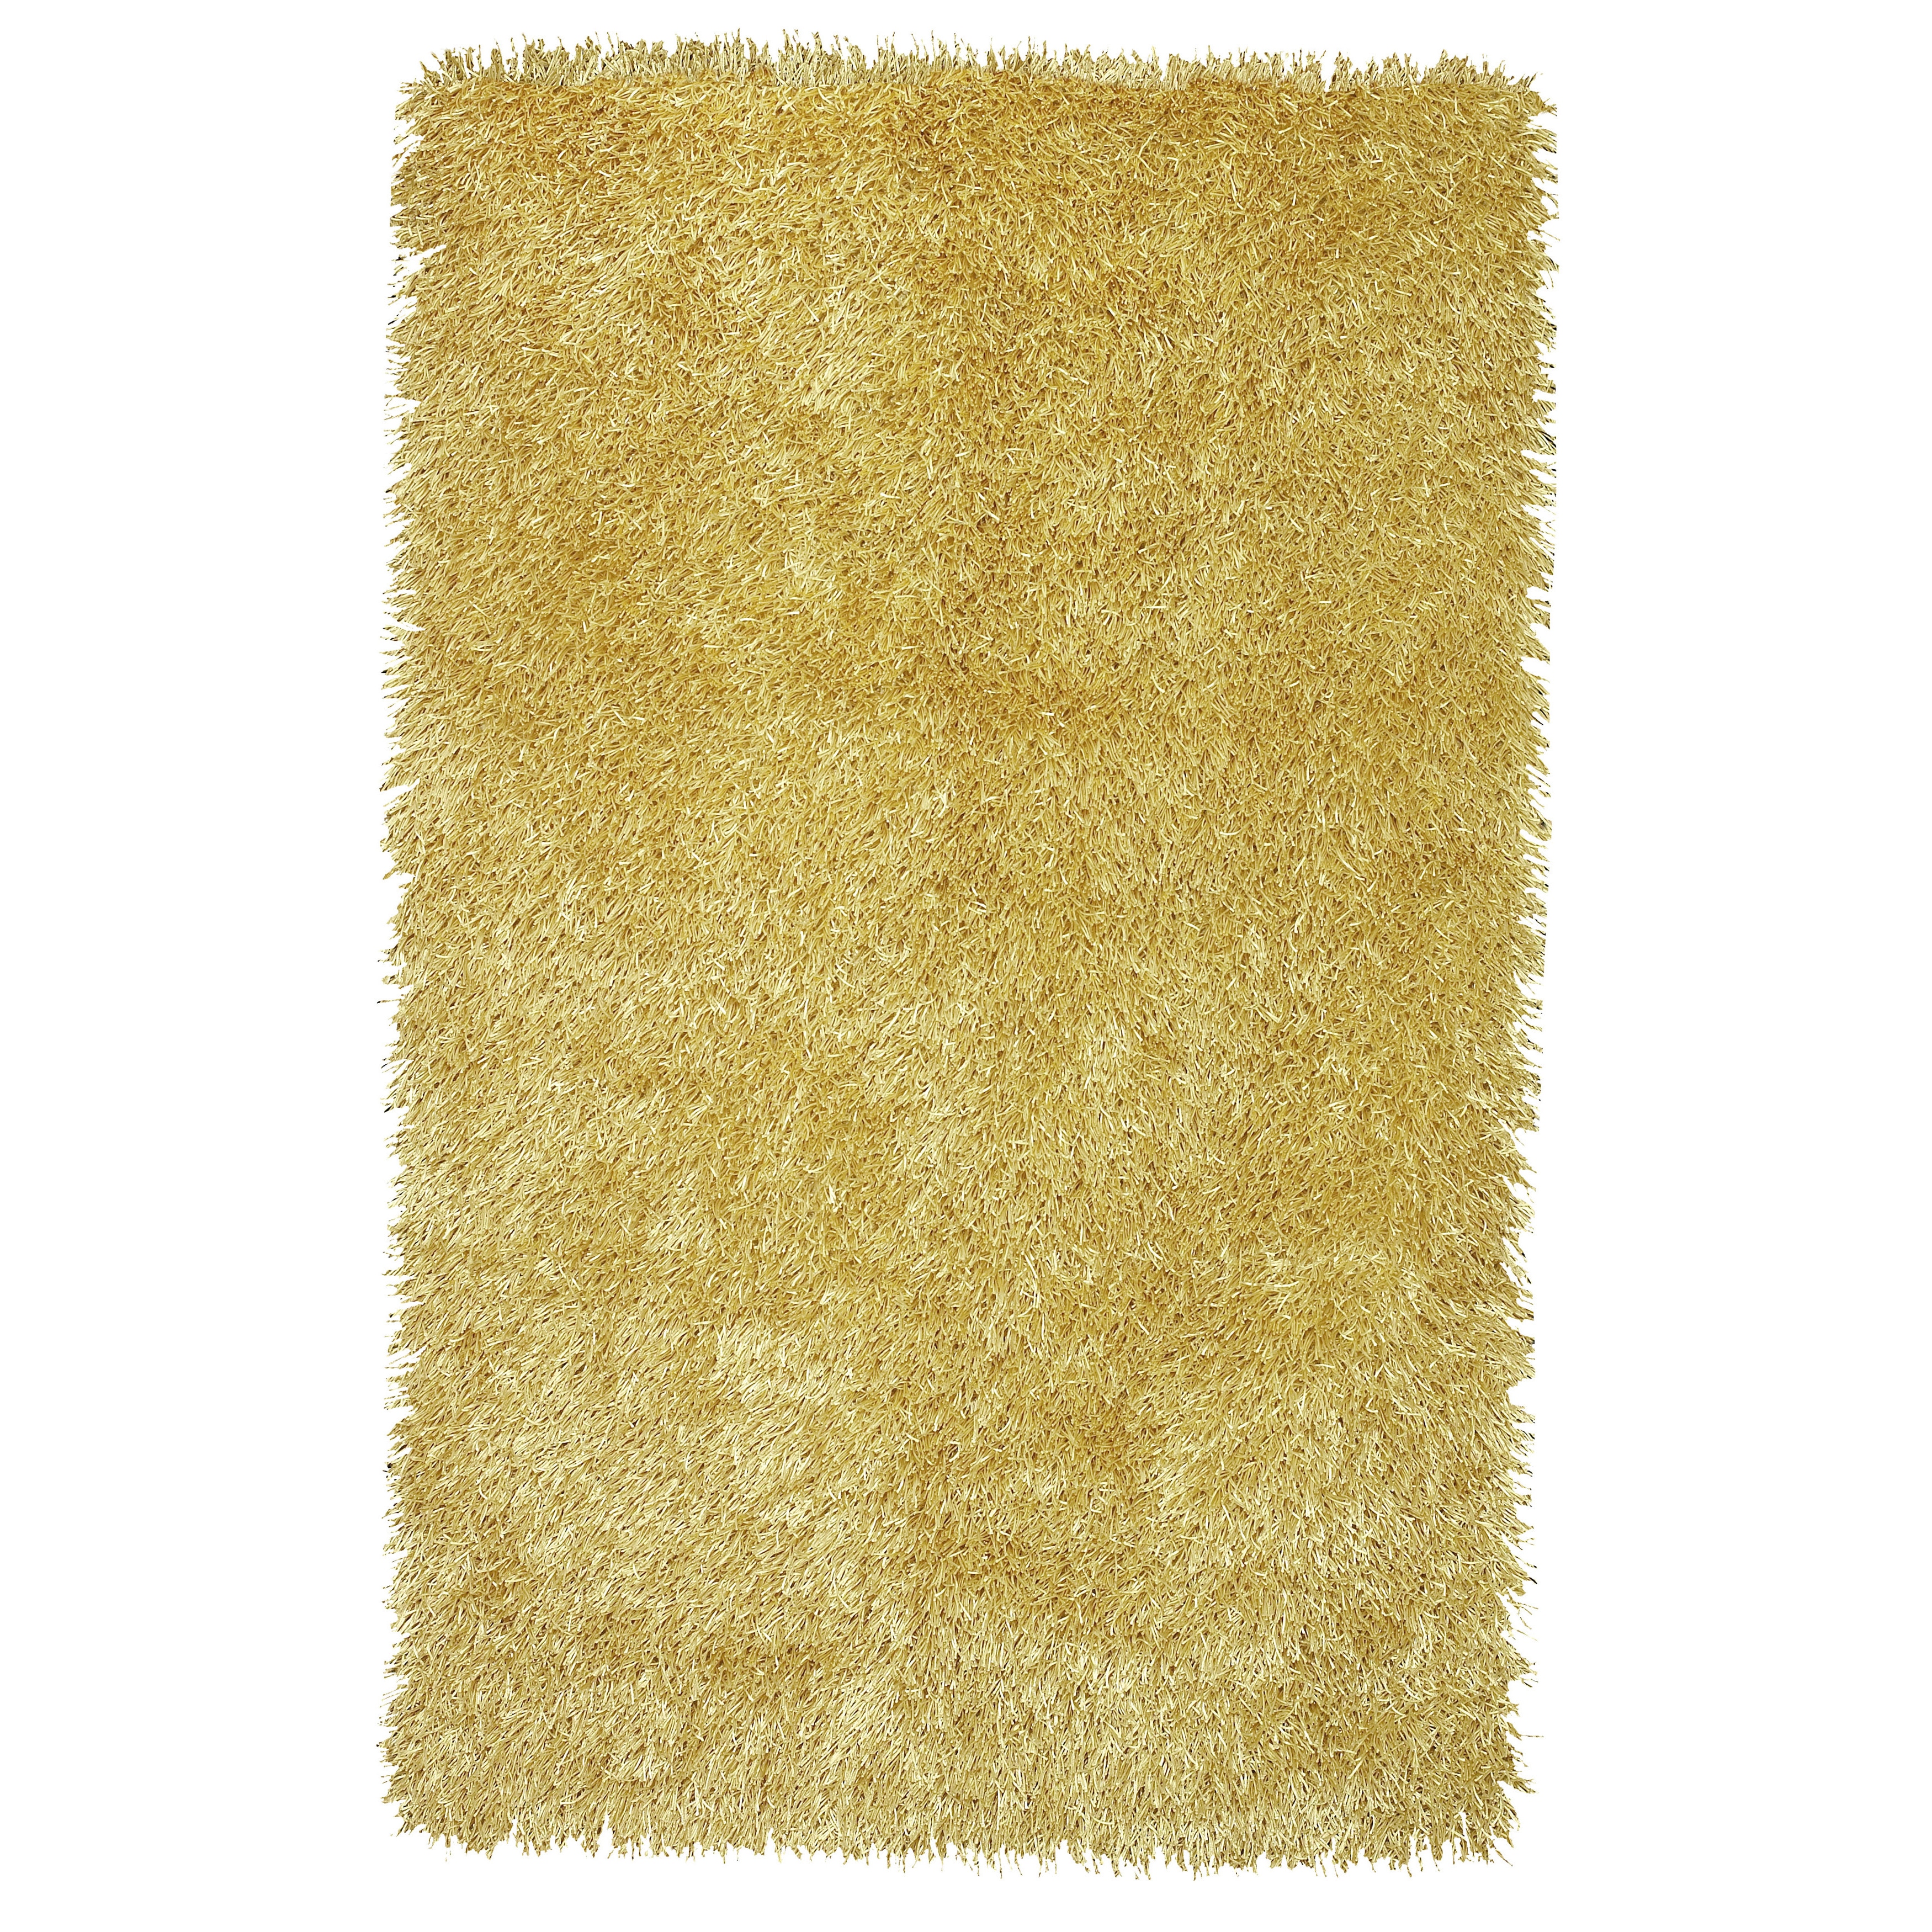 Sands Soleil Canary Yellow Area Rug (5 X 8)